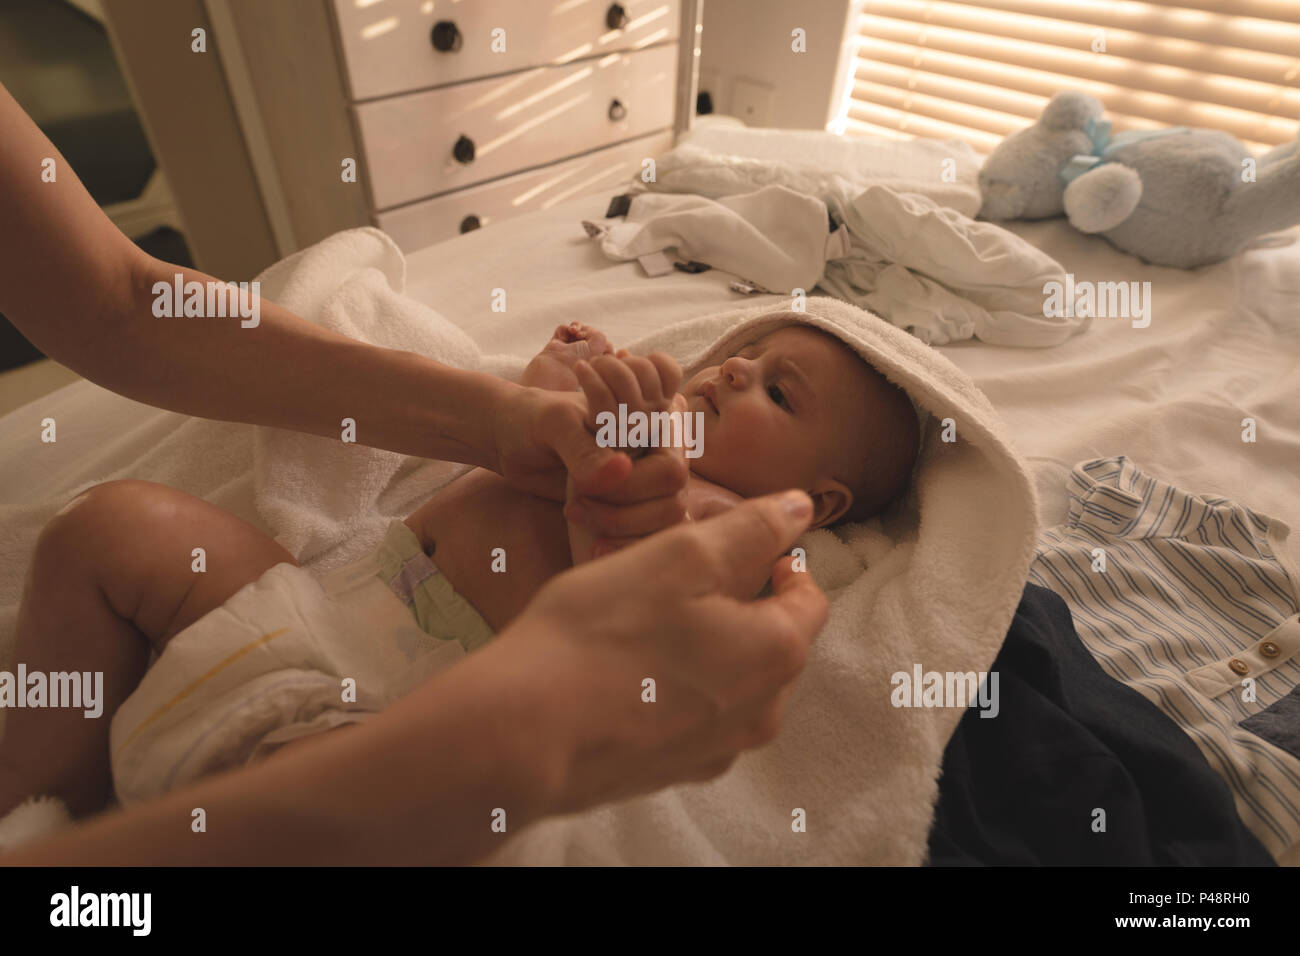 Cute baby lying on bed and mother playing with him on bed Stock Photo